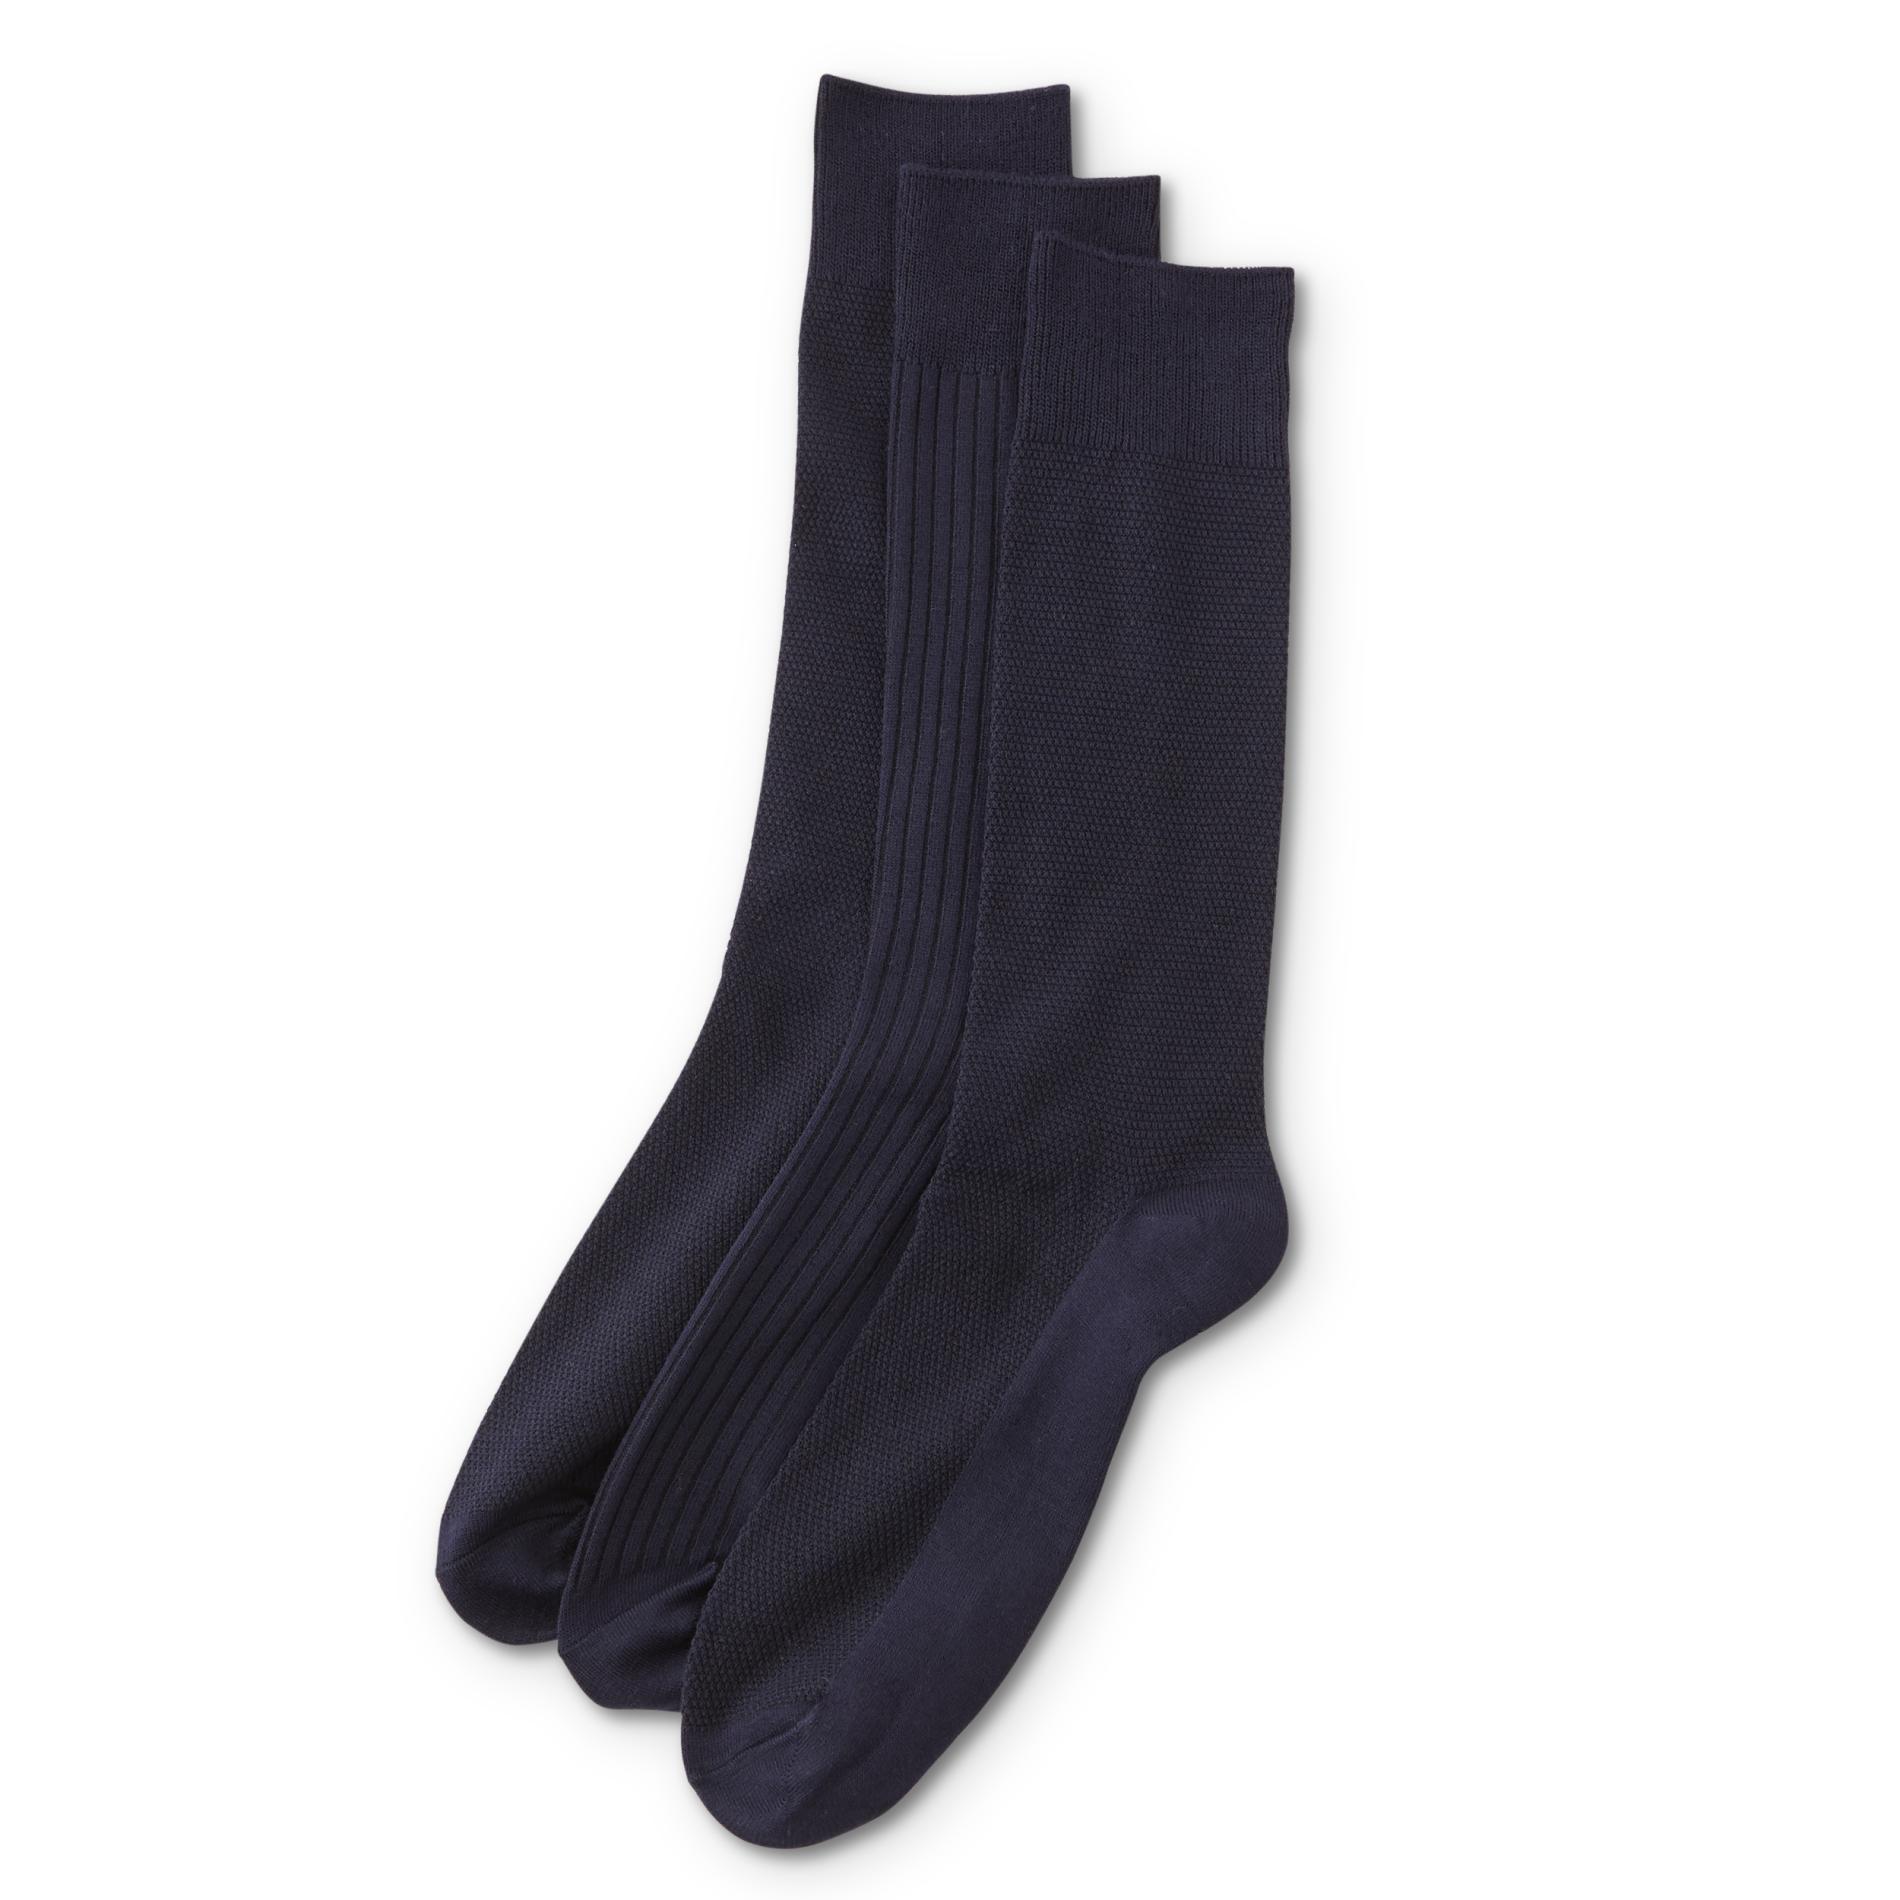 Structure Men's 3-Pairs Dress Socks - Striped & Cable